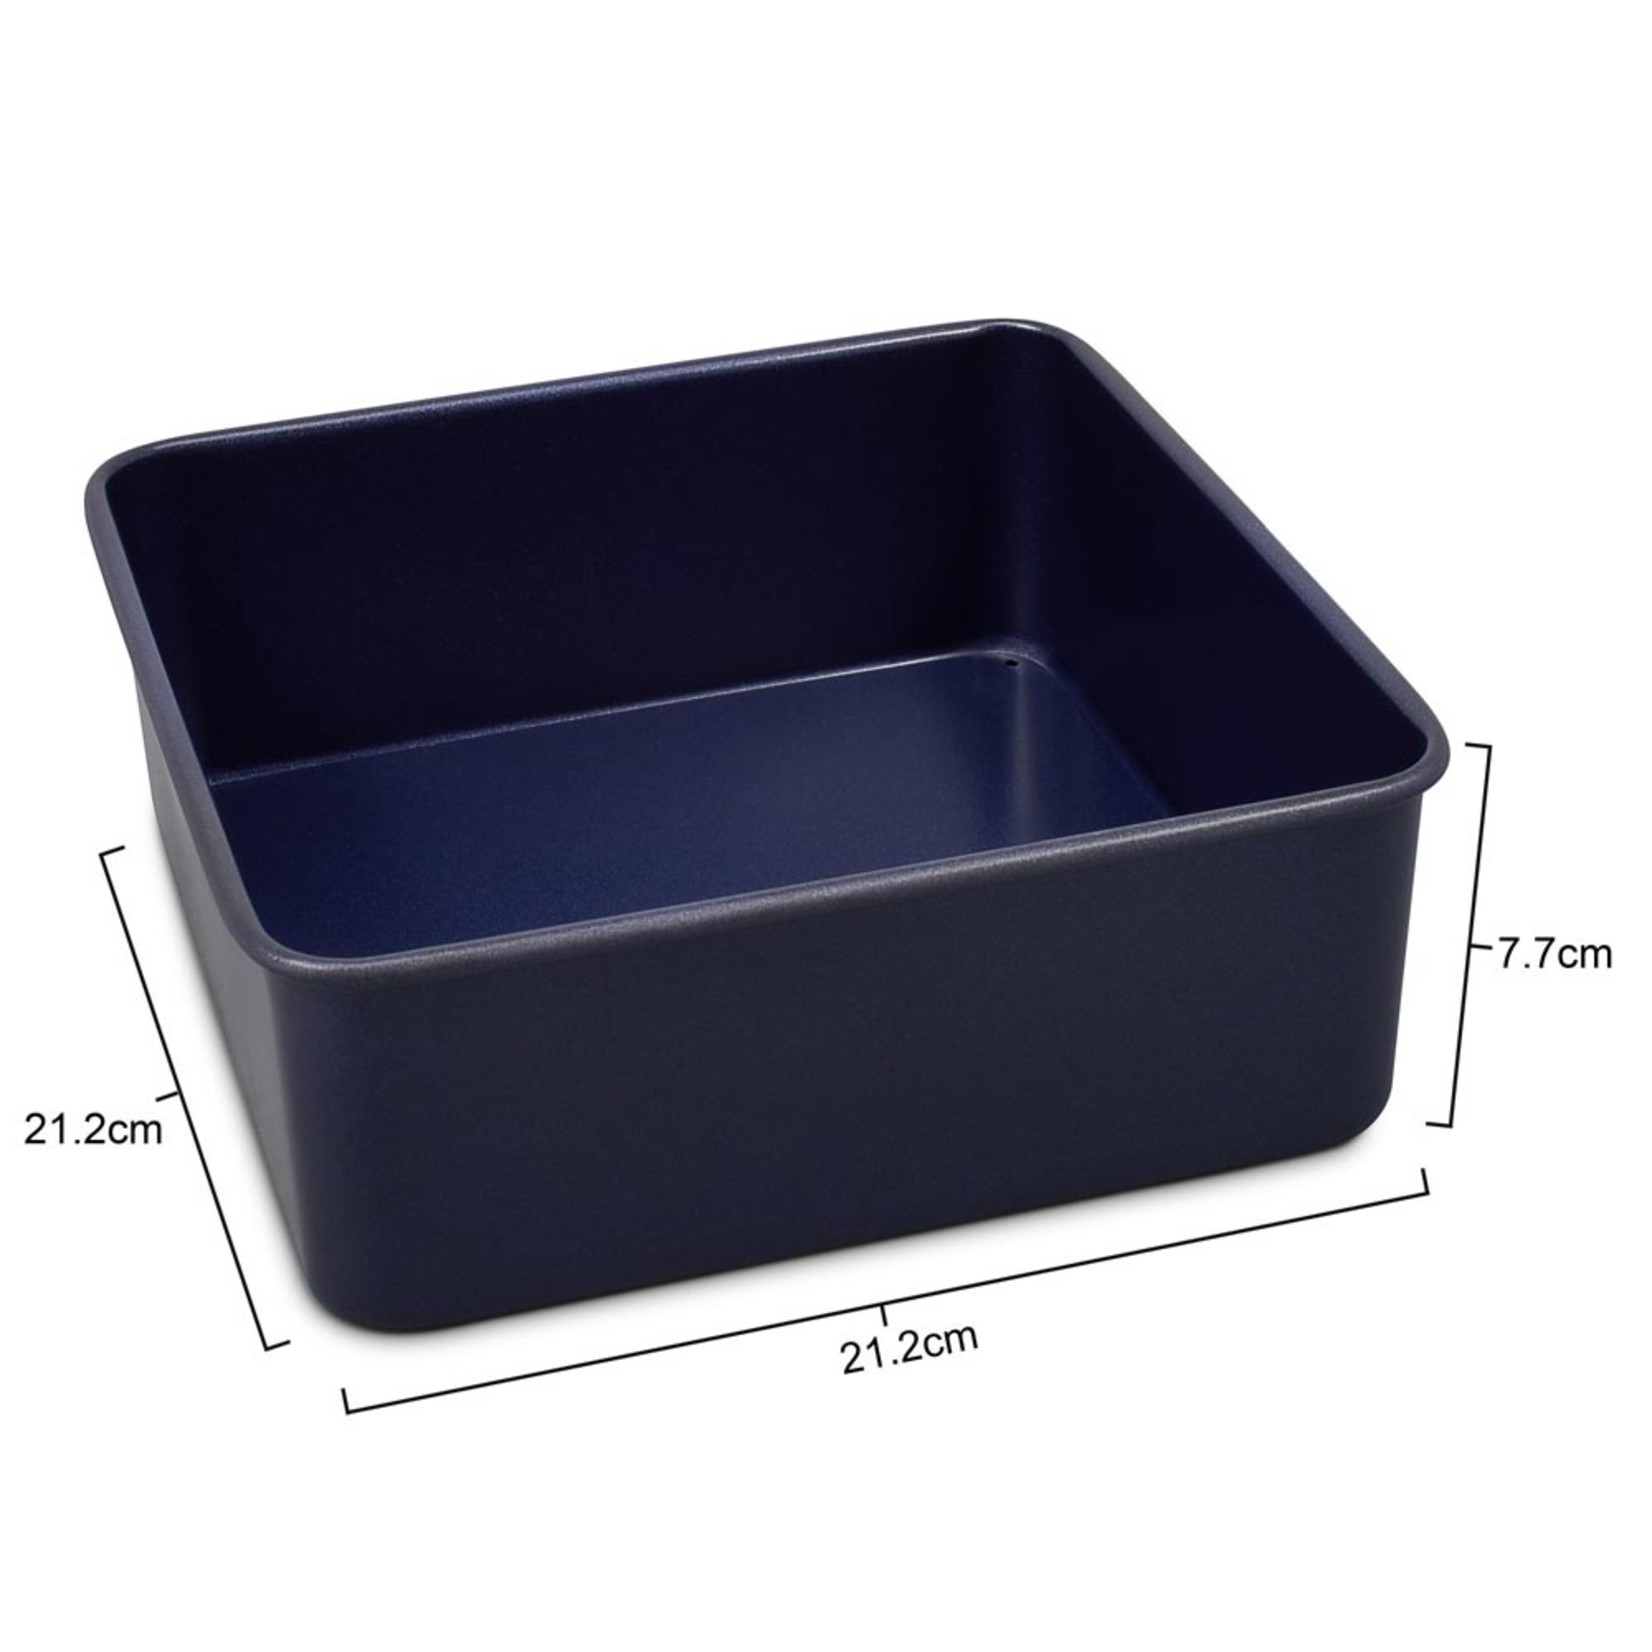 ZYLISS ZYLISS 8" Nonstick Removable Base Square Pan